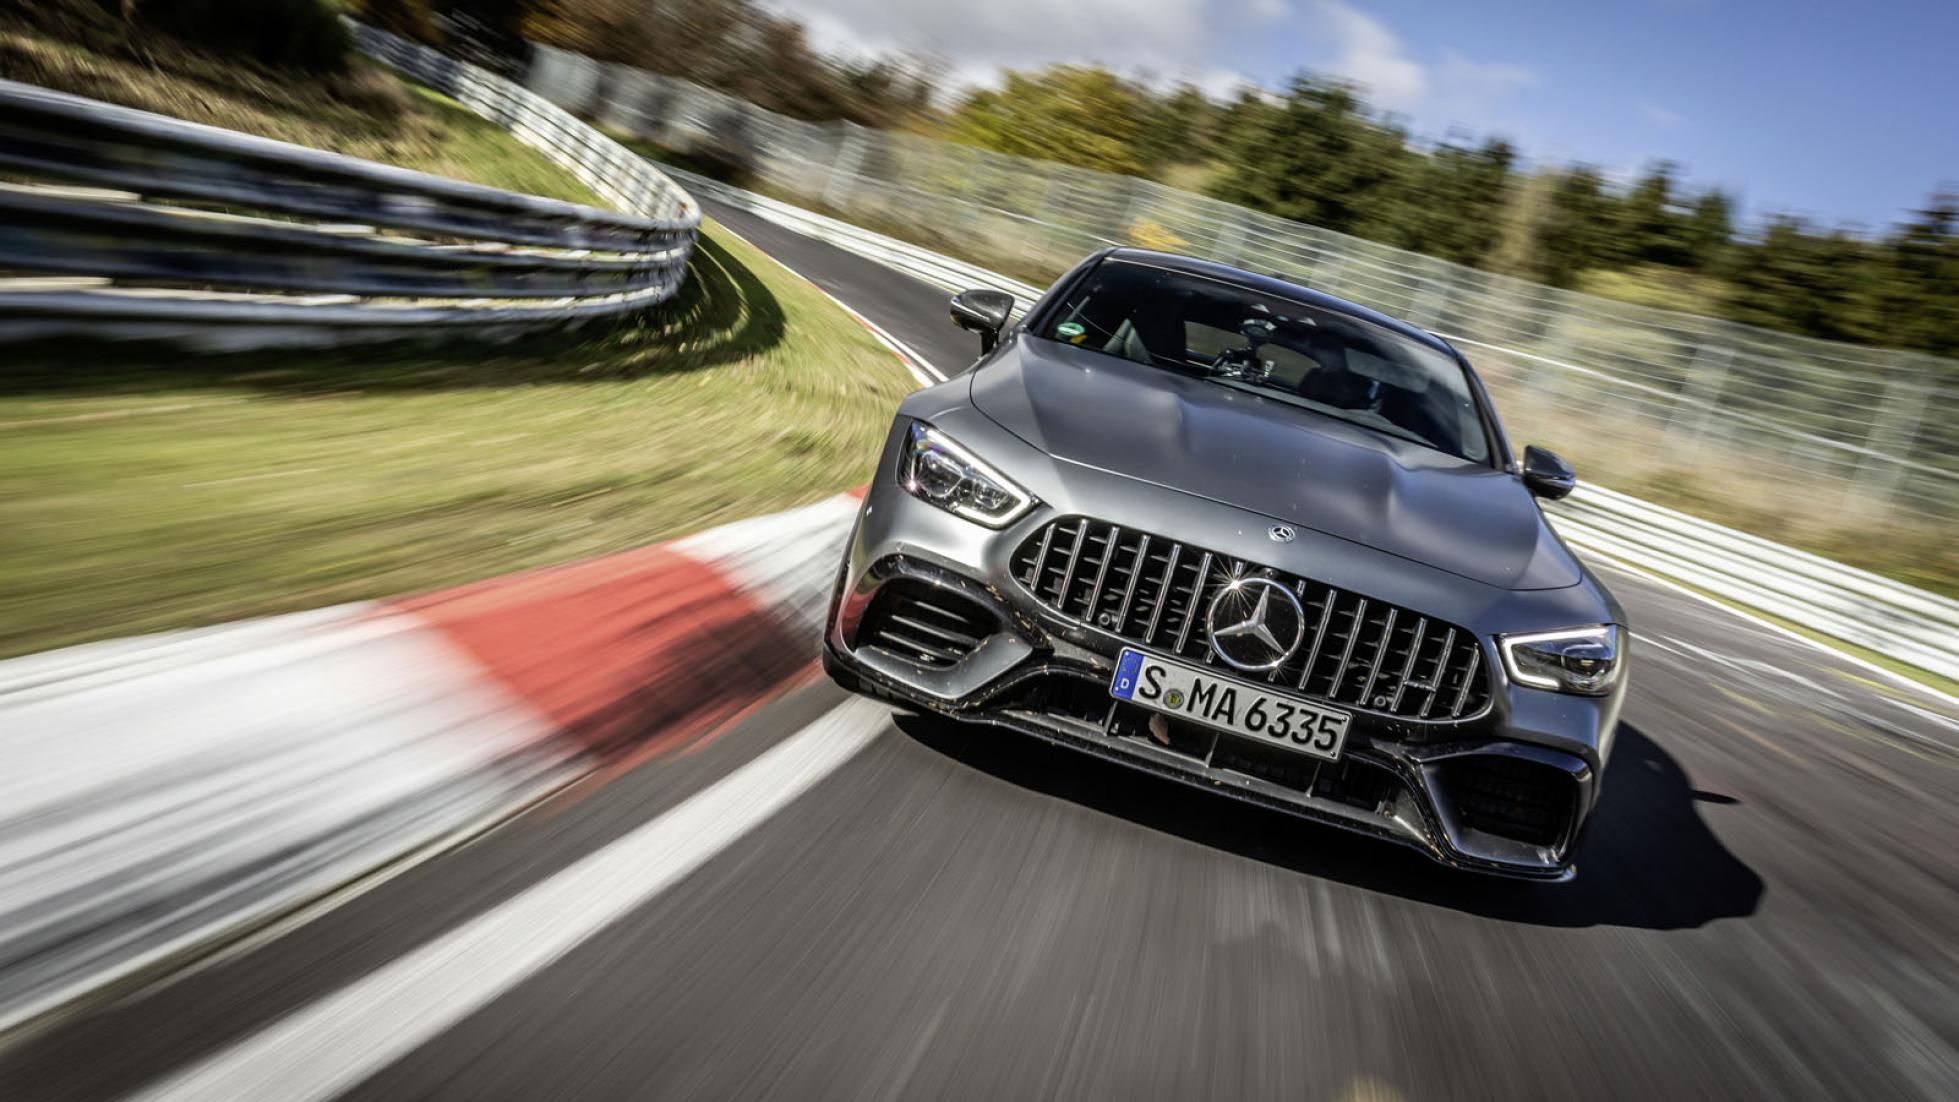 The Merc-AMG GT 4dr is the fastest ‘luxury vehicle’ around the 'Ring